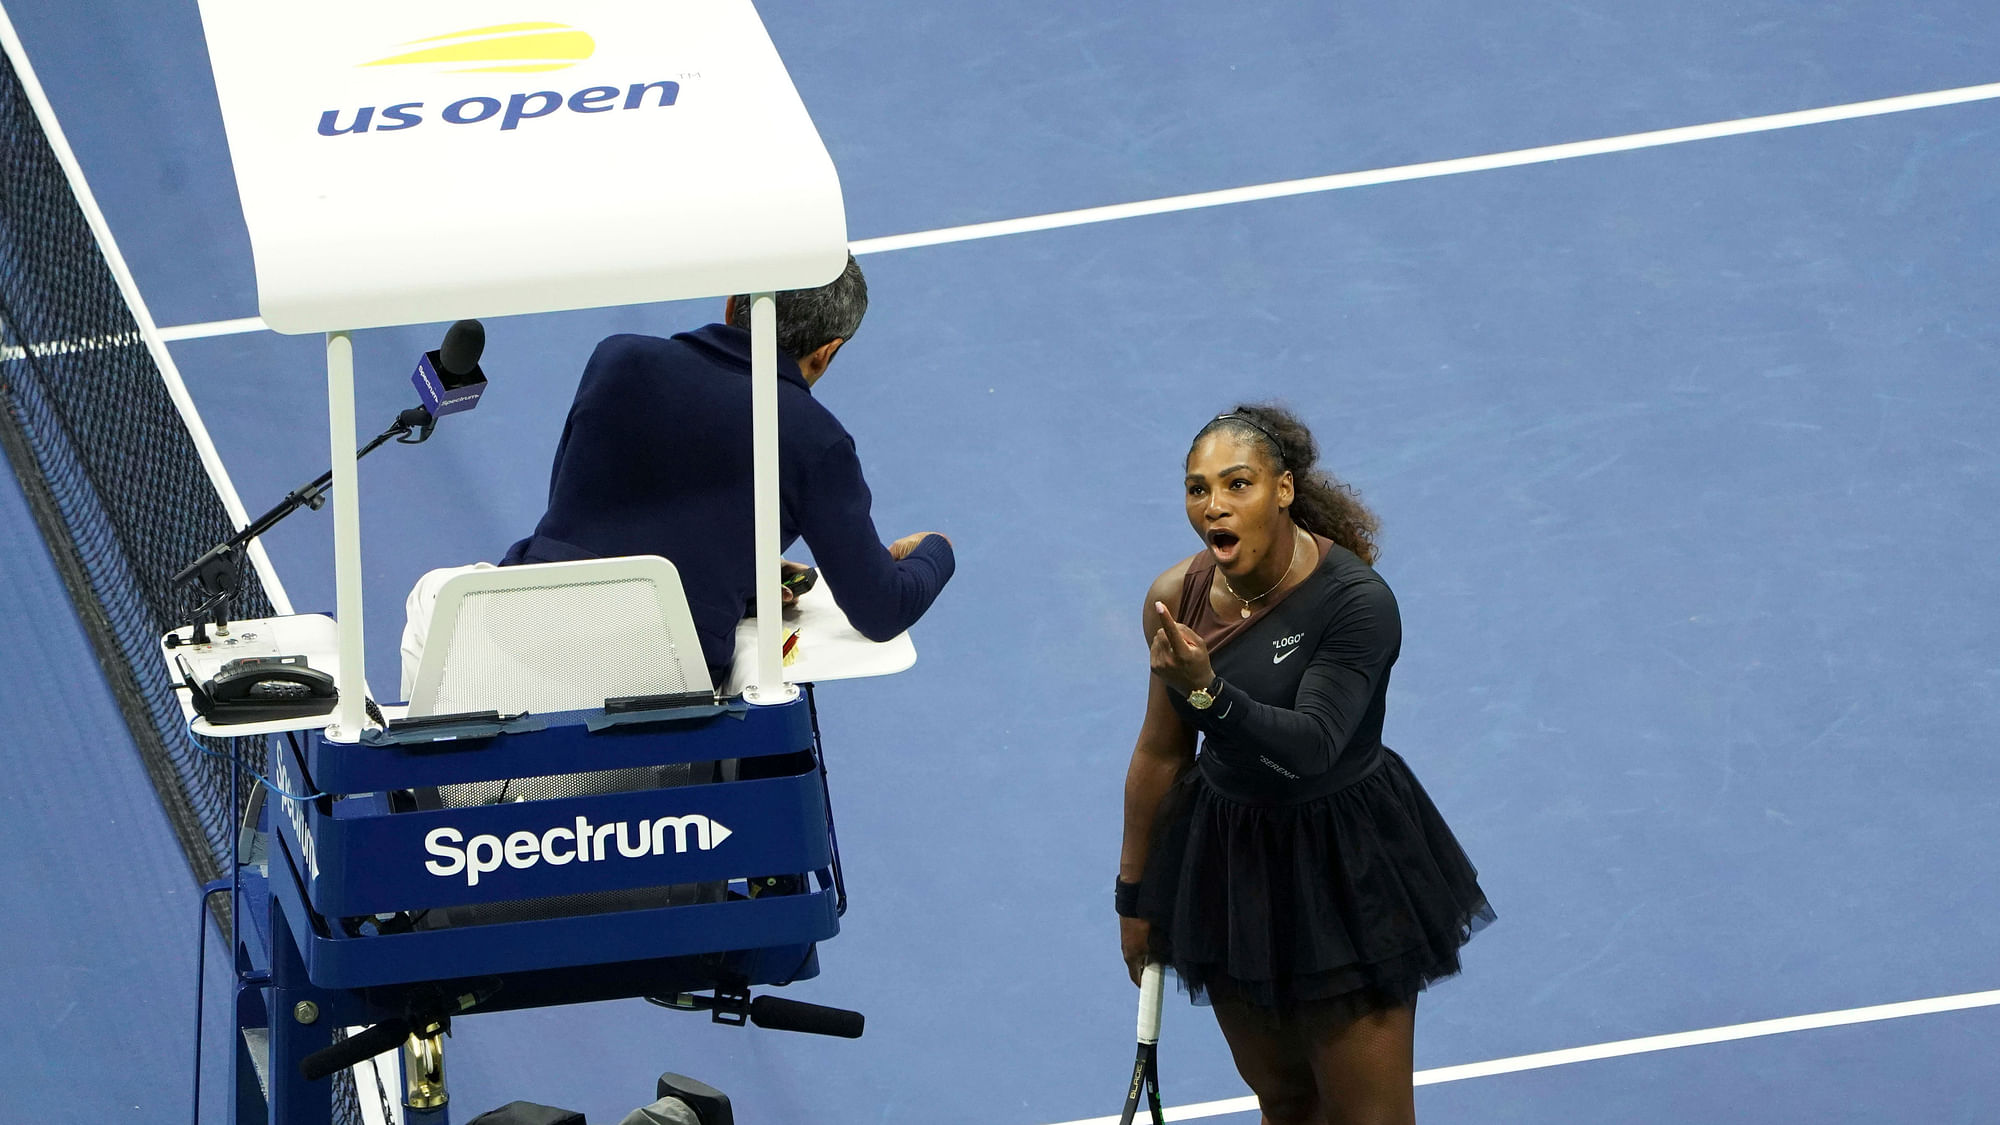 Umpire Carlos Ramos will not officiate matches involving Serena Williams or her older sister, Venus.